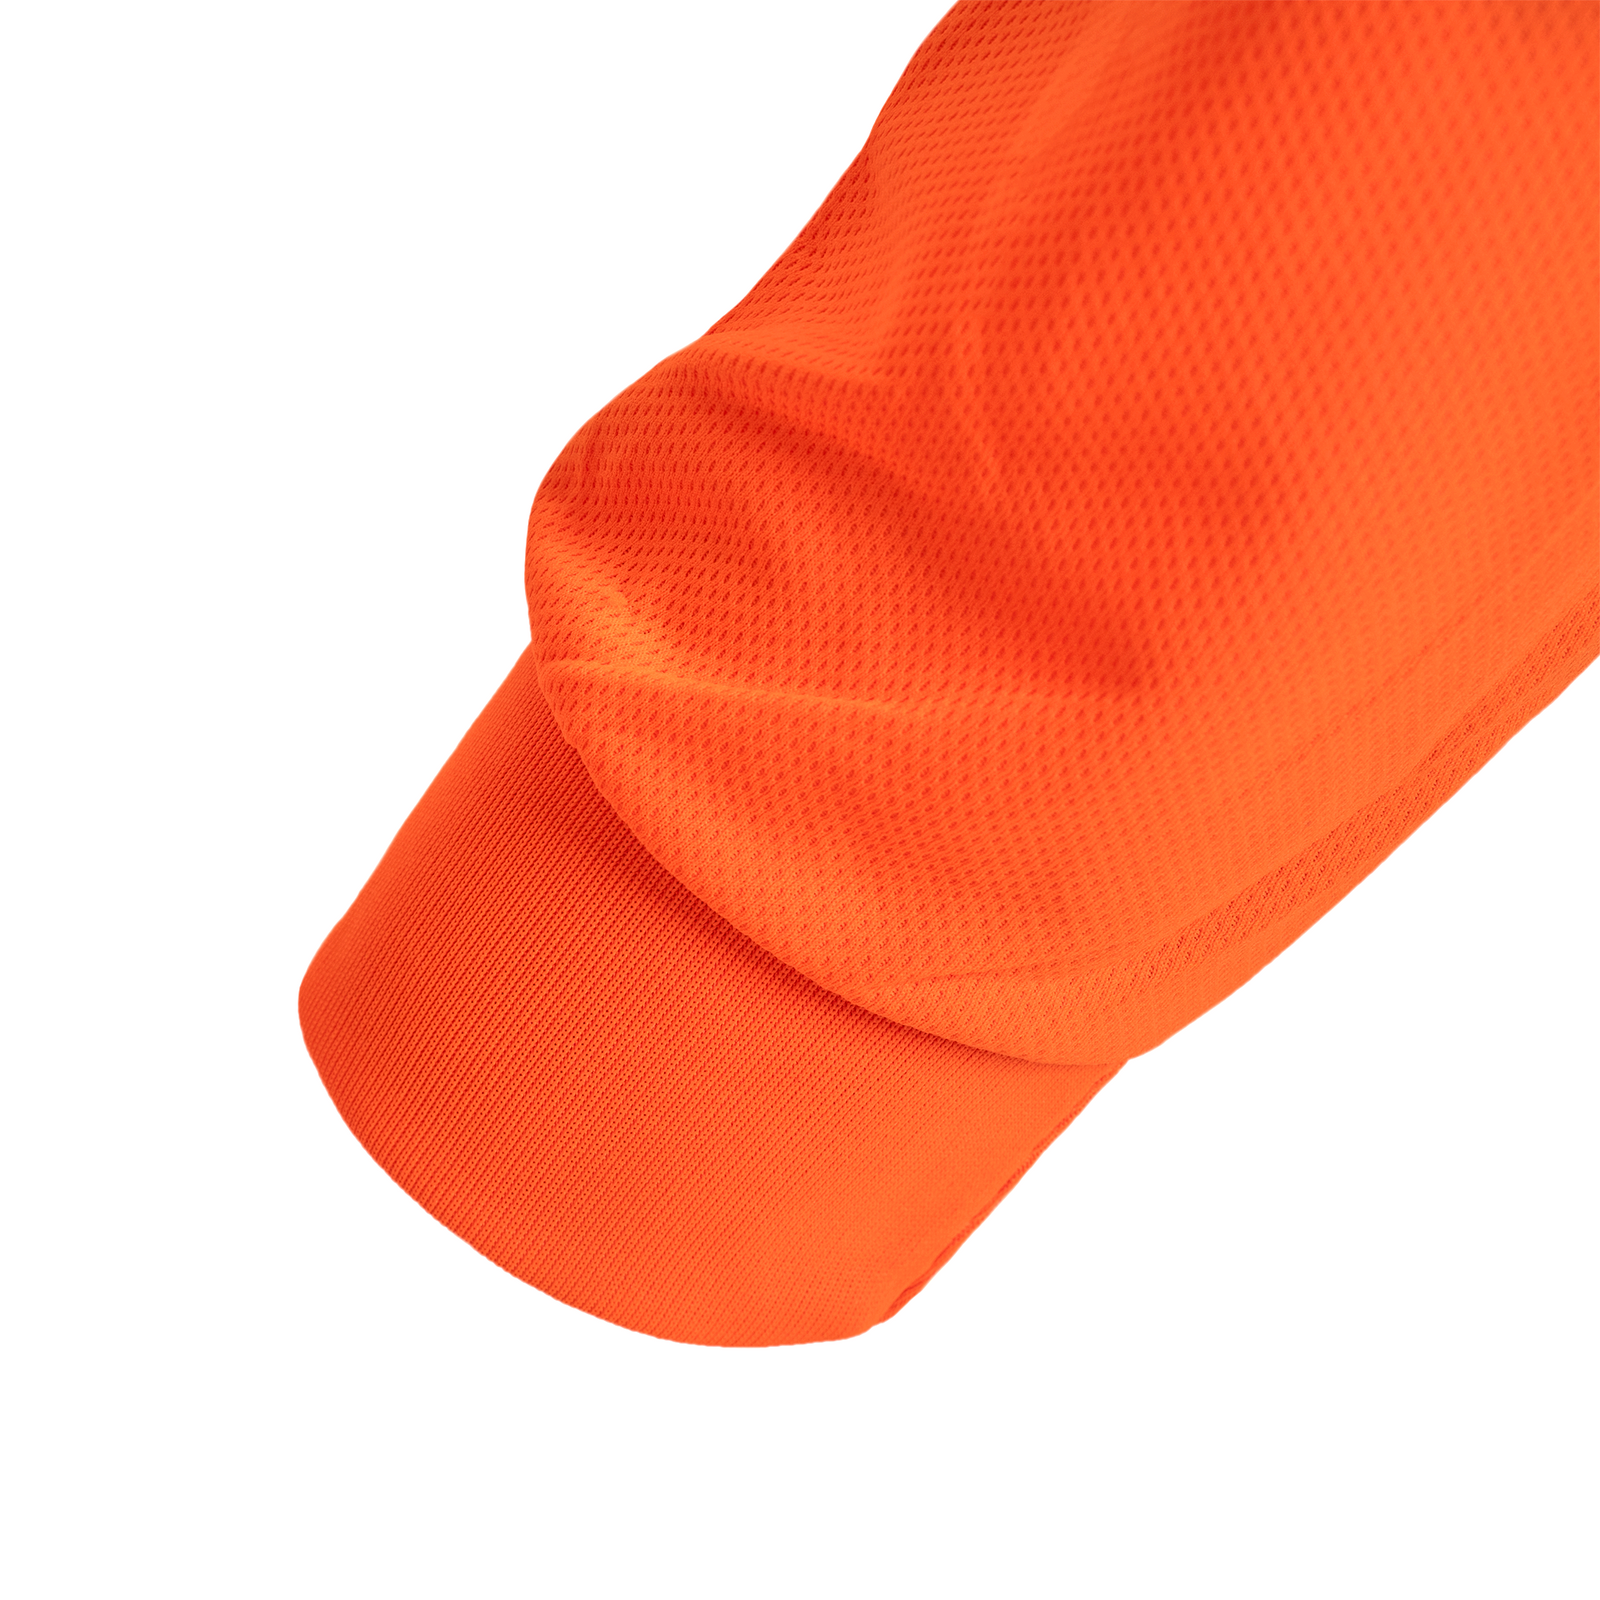 Detail of  the cuff of the high visibility orange safety long sleeve shirt with birds eye fabric